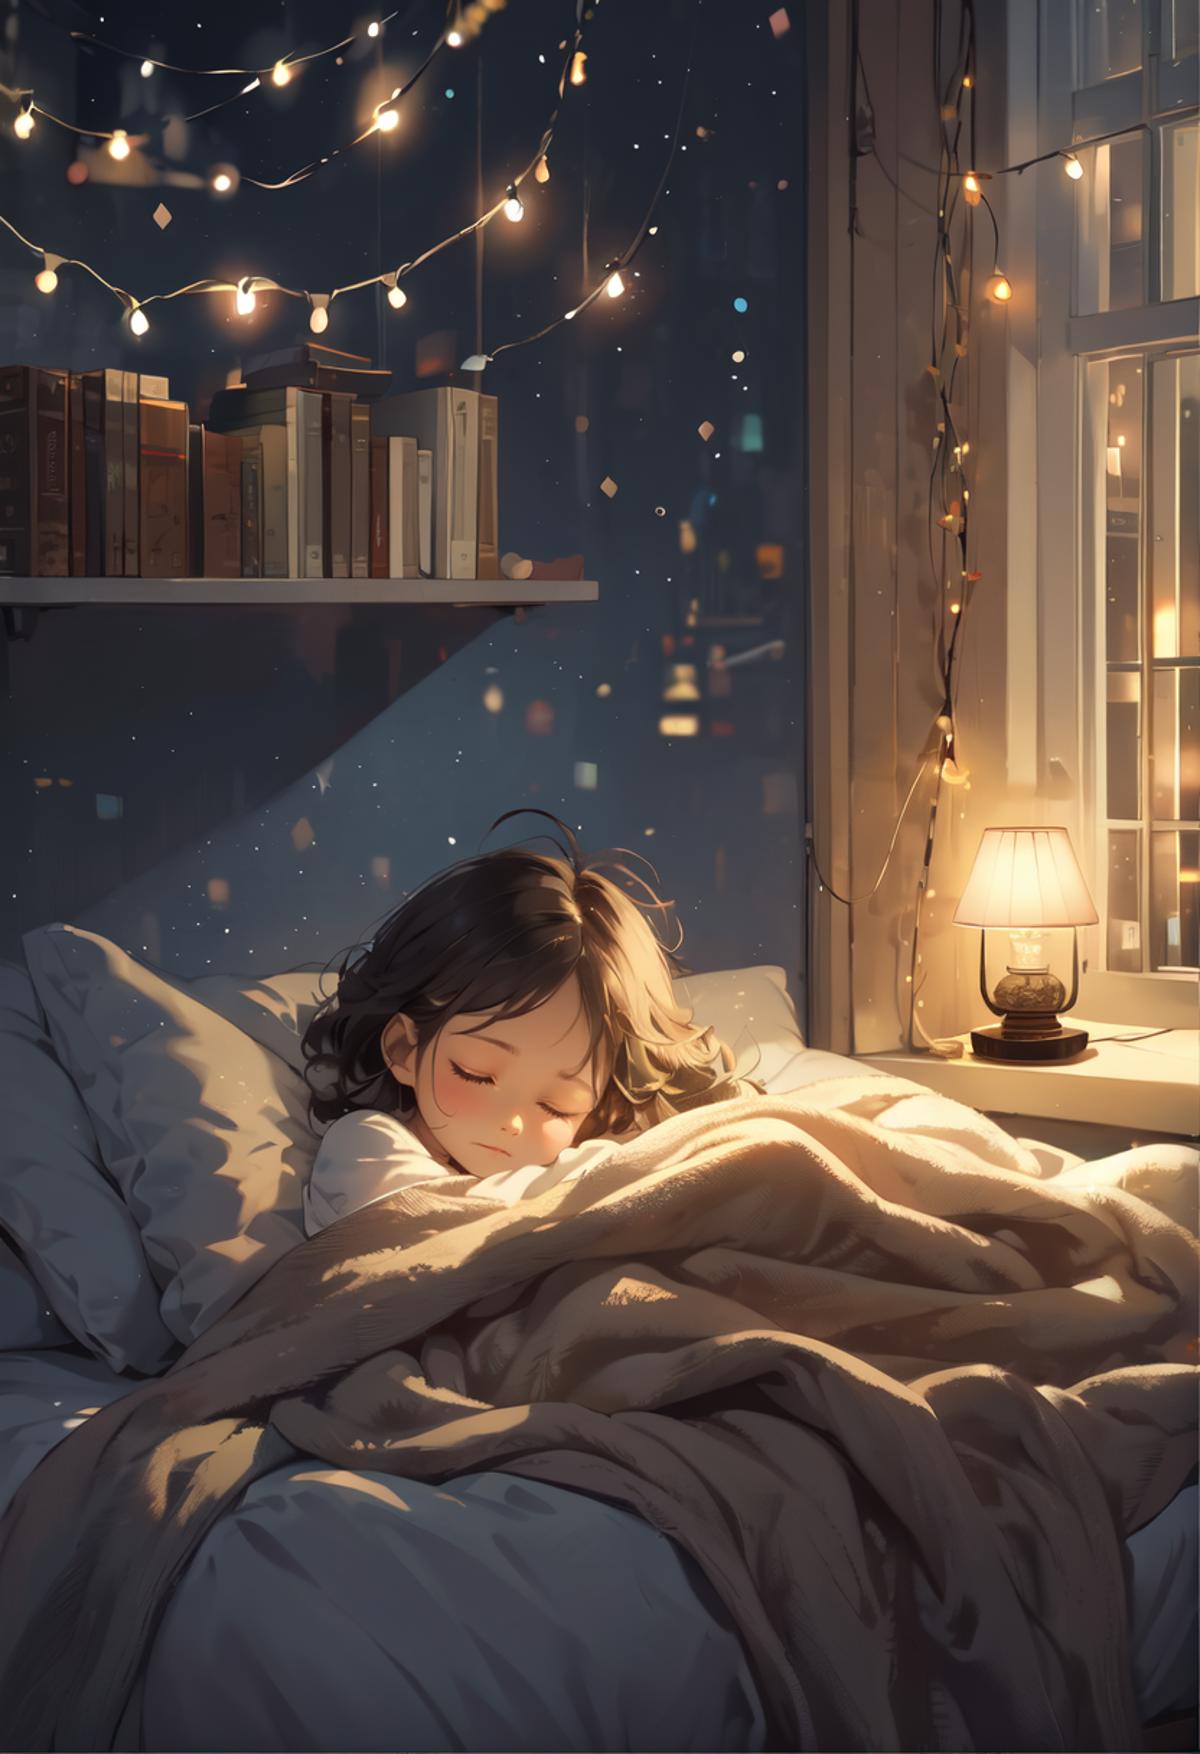 A sleeping girl in a bedroom with a night light on.